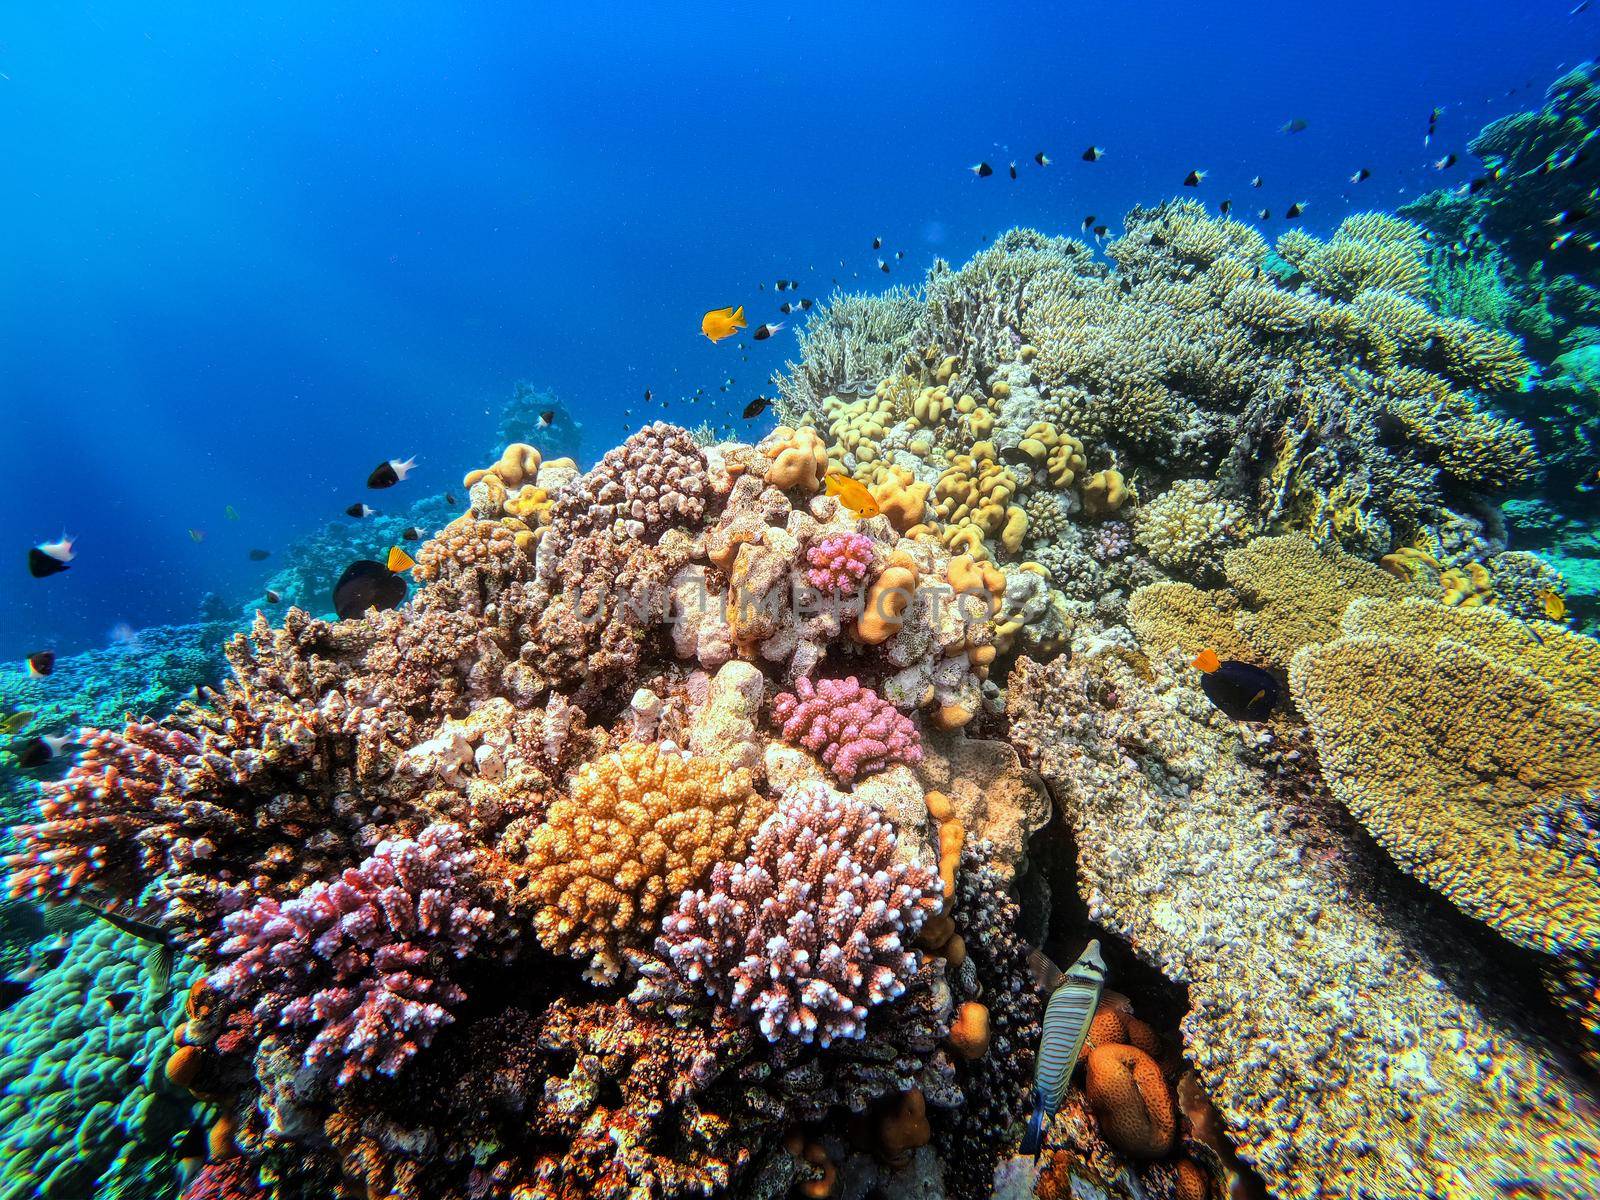 Coral on reef in red sea, Marsa Alam, Egypt by artush